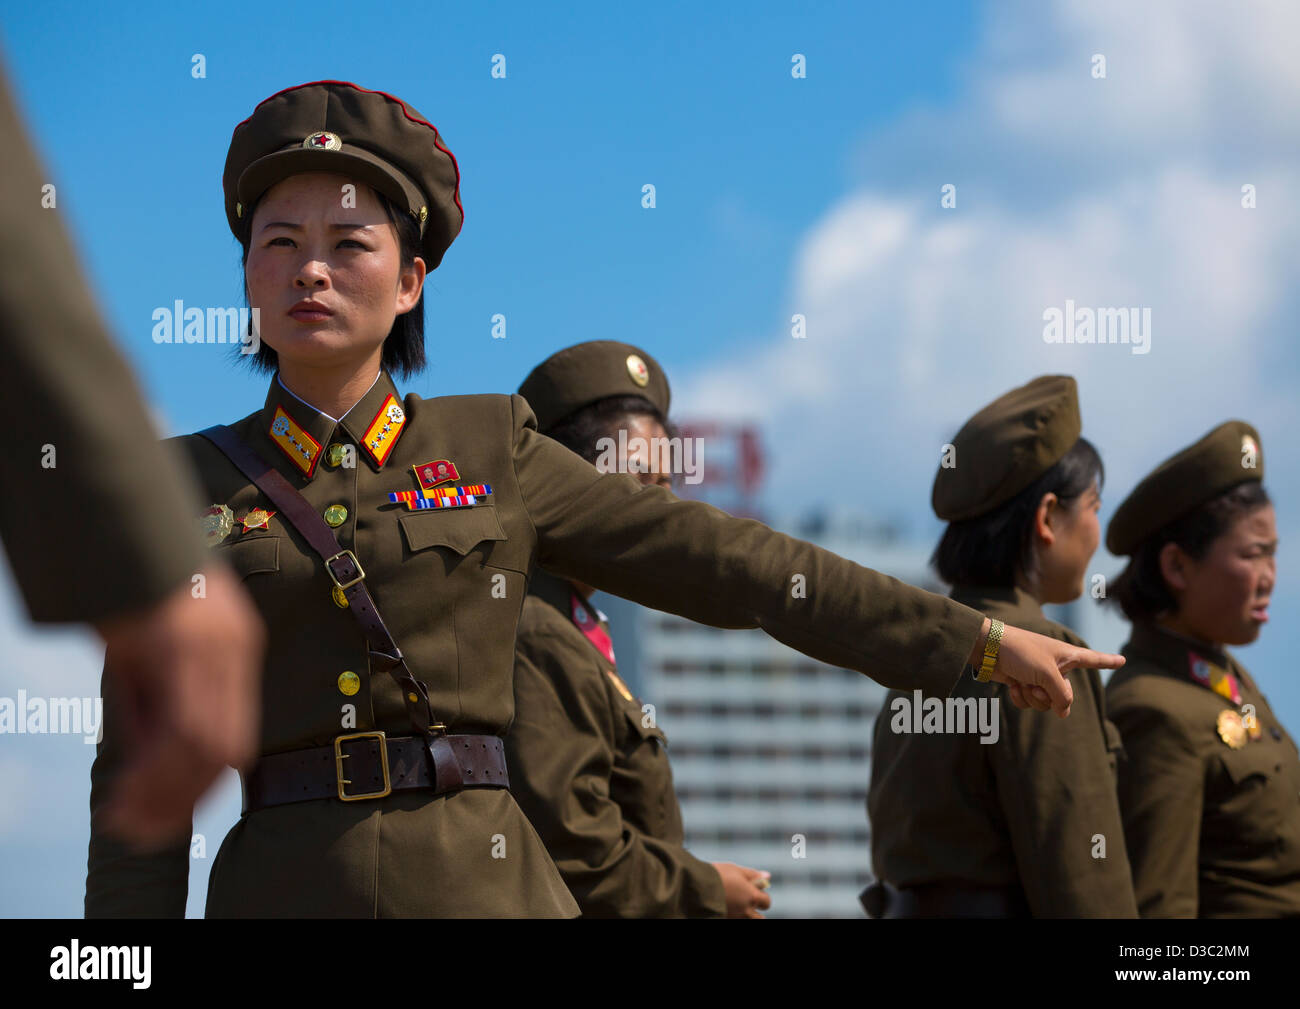 North Korean Female Soldiers In Tower Of The Juche Idea, Pyongyang, North Korea Stock Photo